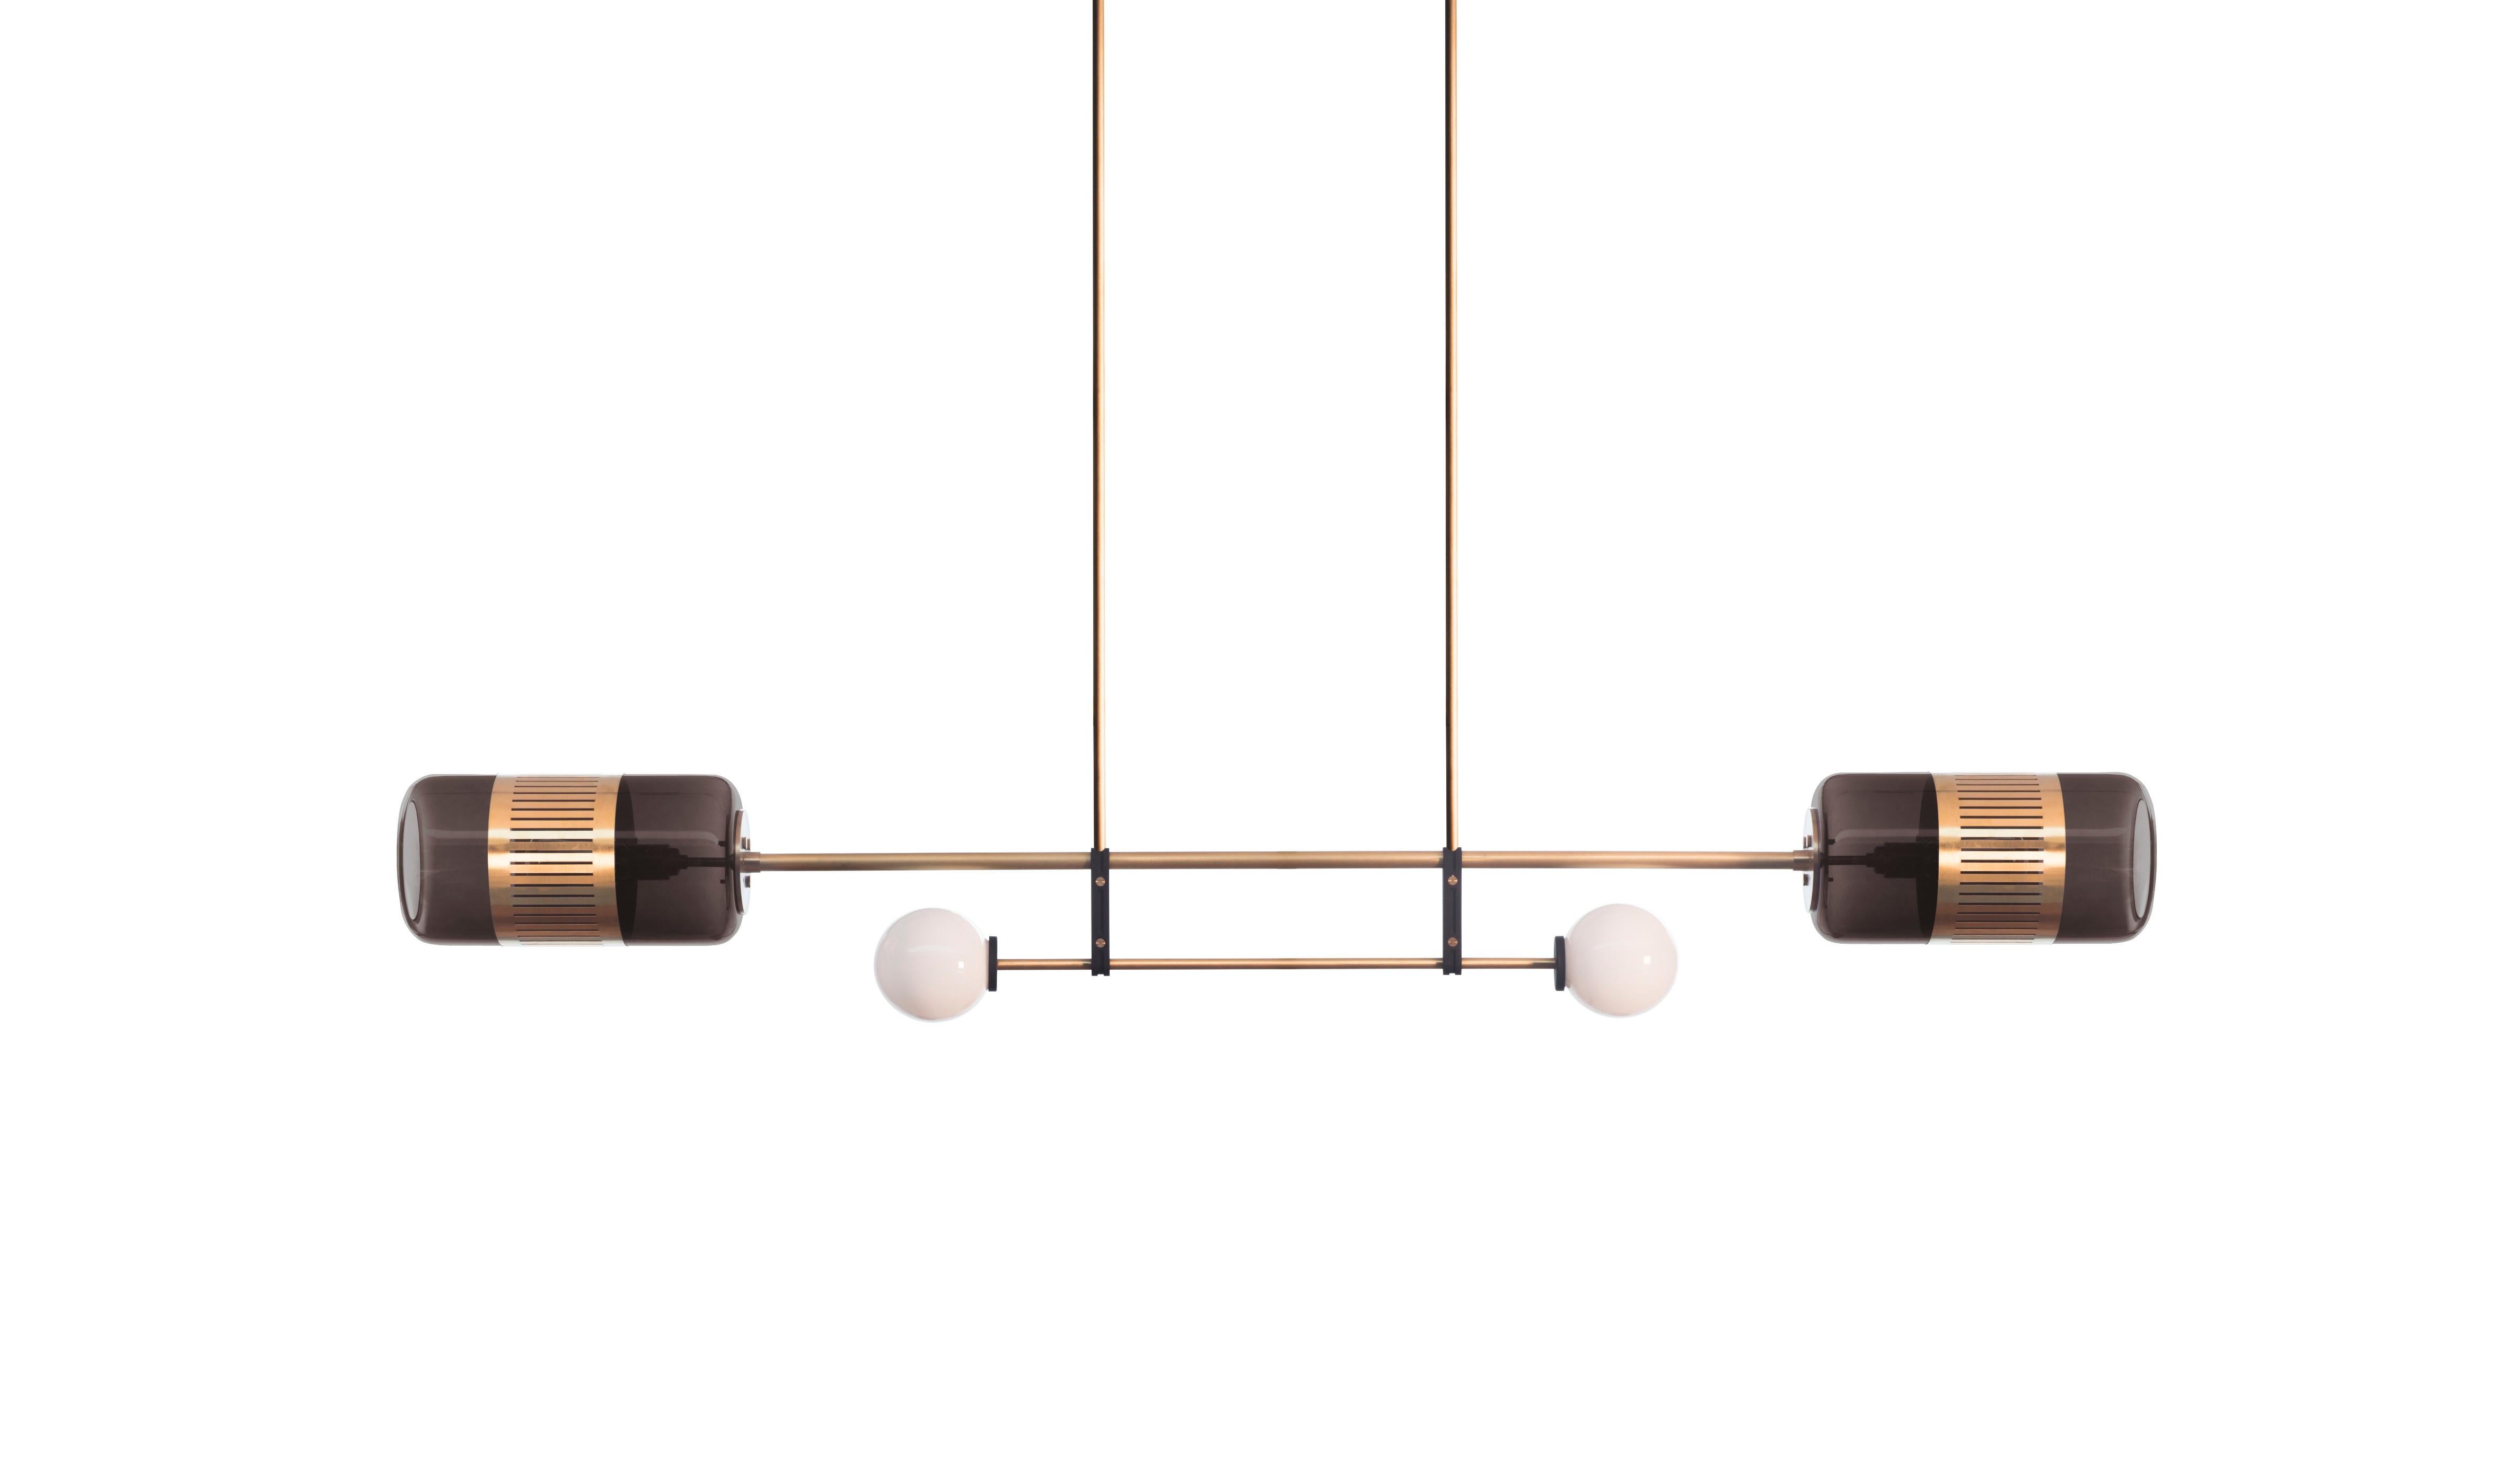 Smoked Lizak pendant by Bert Frank
Dimensions: H 180 x W 180 x D 28 cm
Materials: Brass and glass

Available finishes: Brass, opal + blue
All our lamps can be wired according to each country. If sold to the USA it will be wired for the USA for